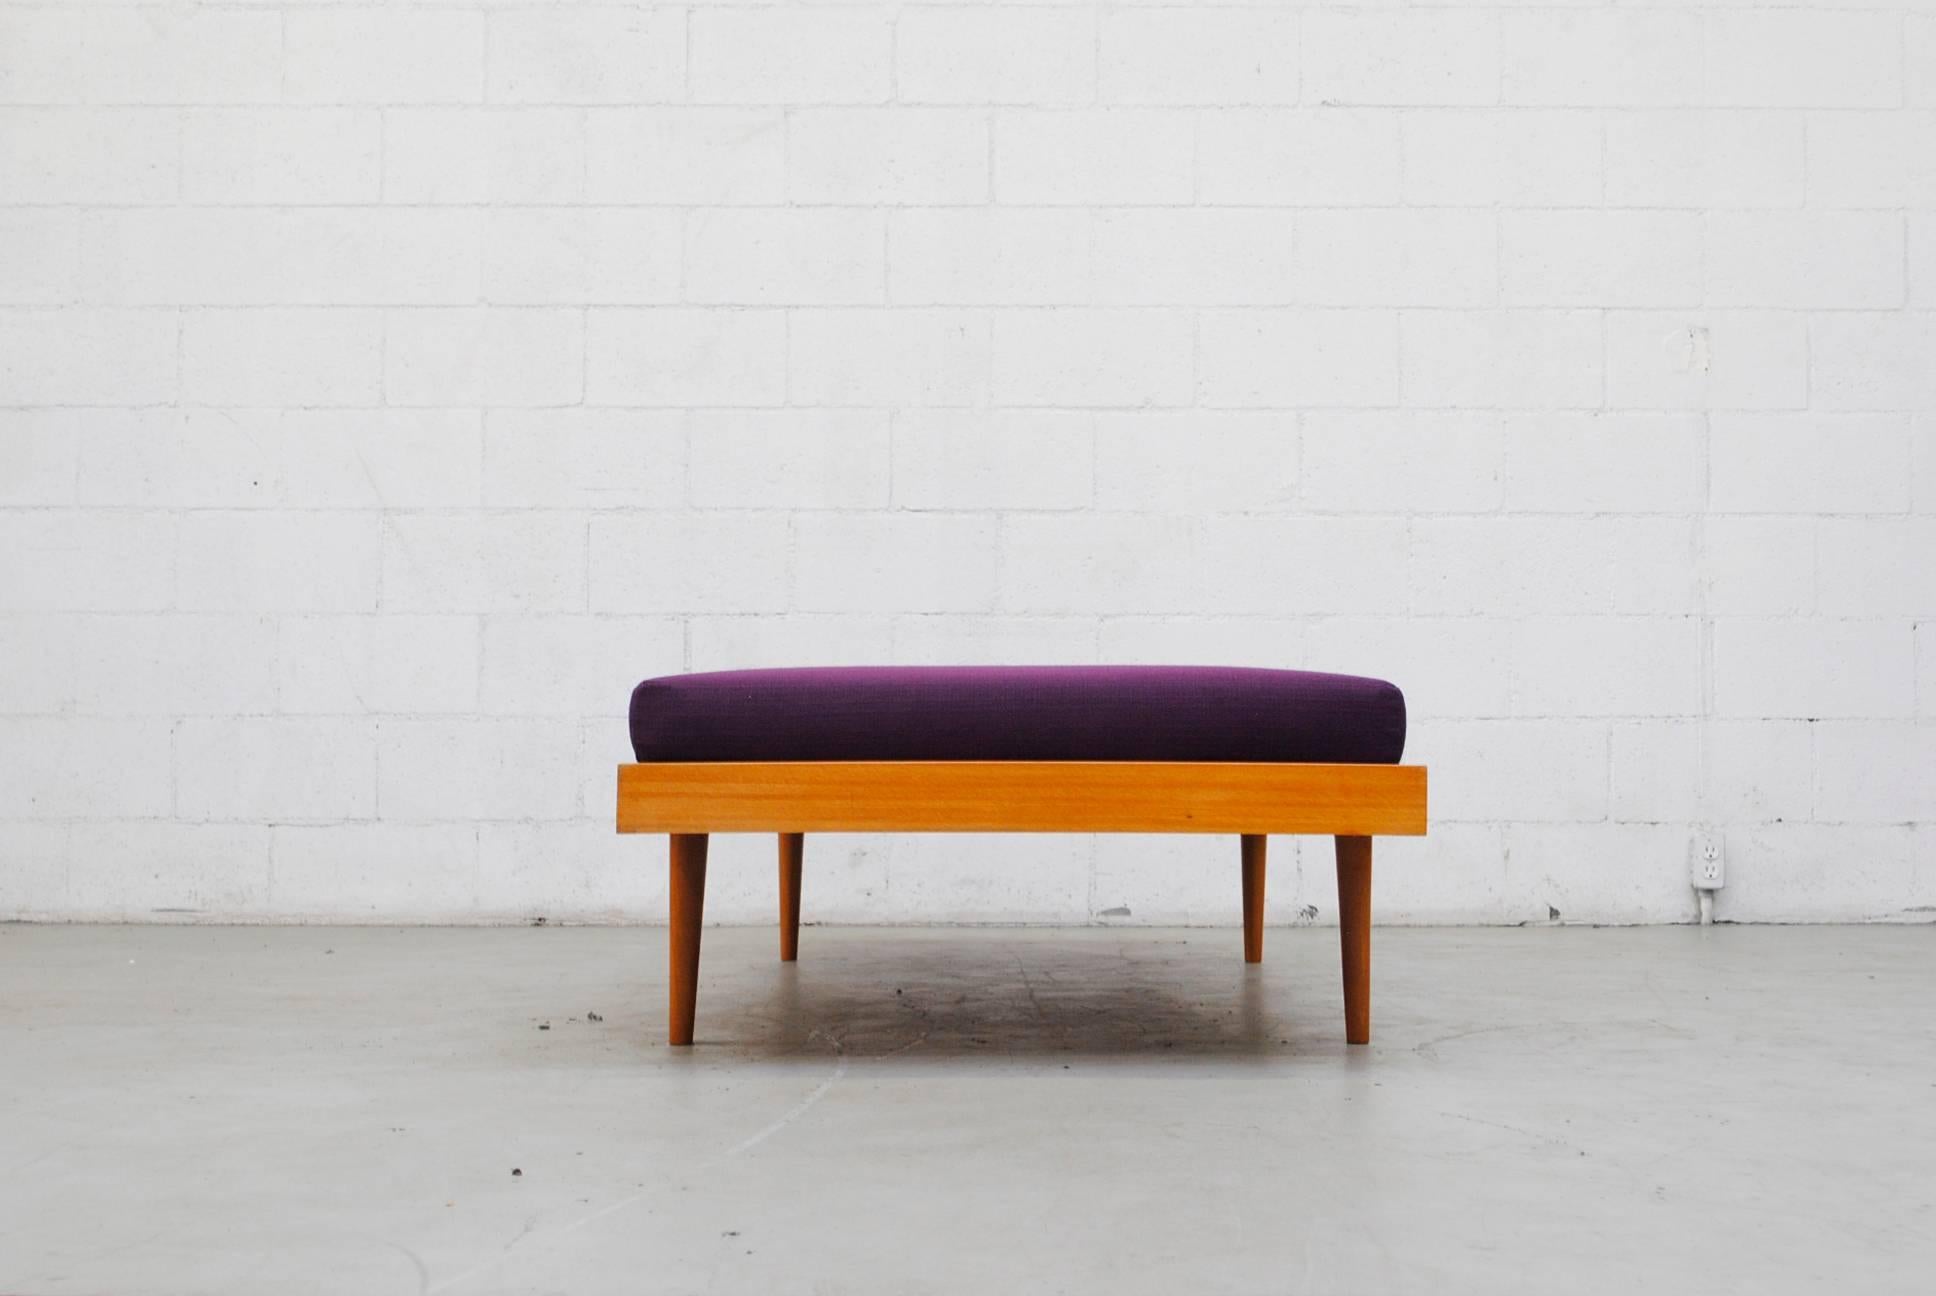 Charlotte Perriand inspired midcentury daybed with tapered legs and new plum mattress. Frame in good original condition with signs of wear consistent with its age and usage.